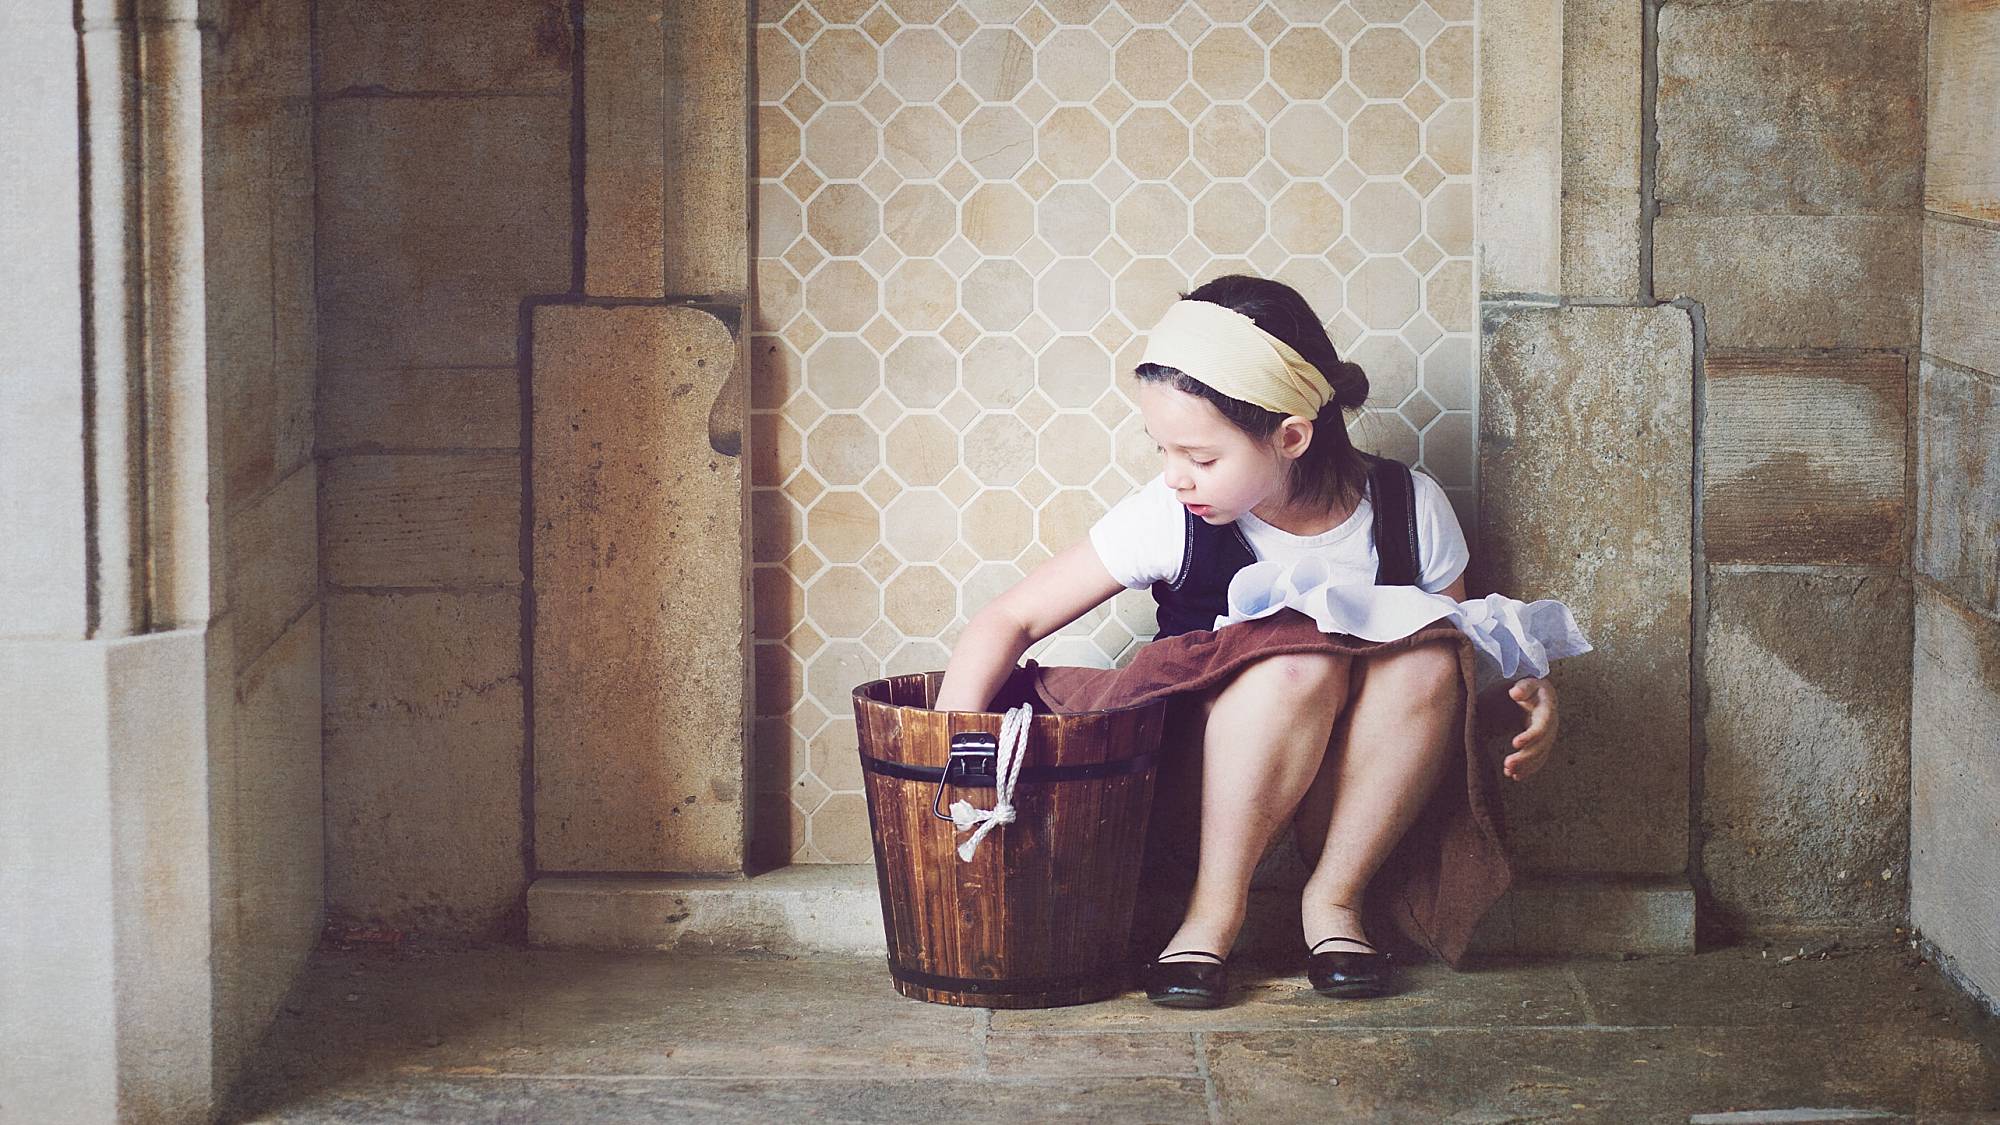 image of a little girl in a stone alcove, dressed as Cinderella washing the floors